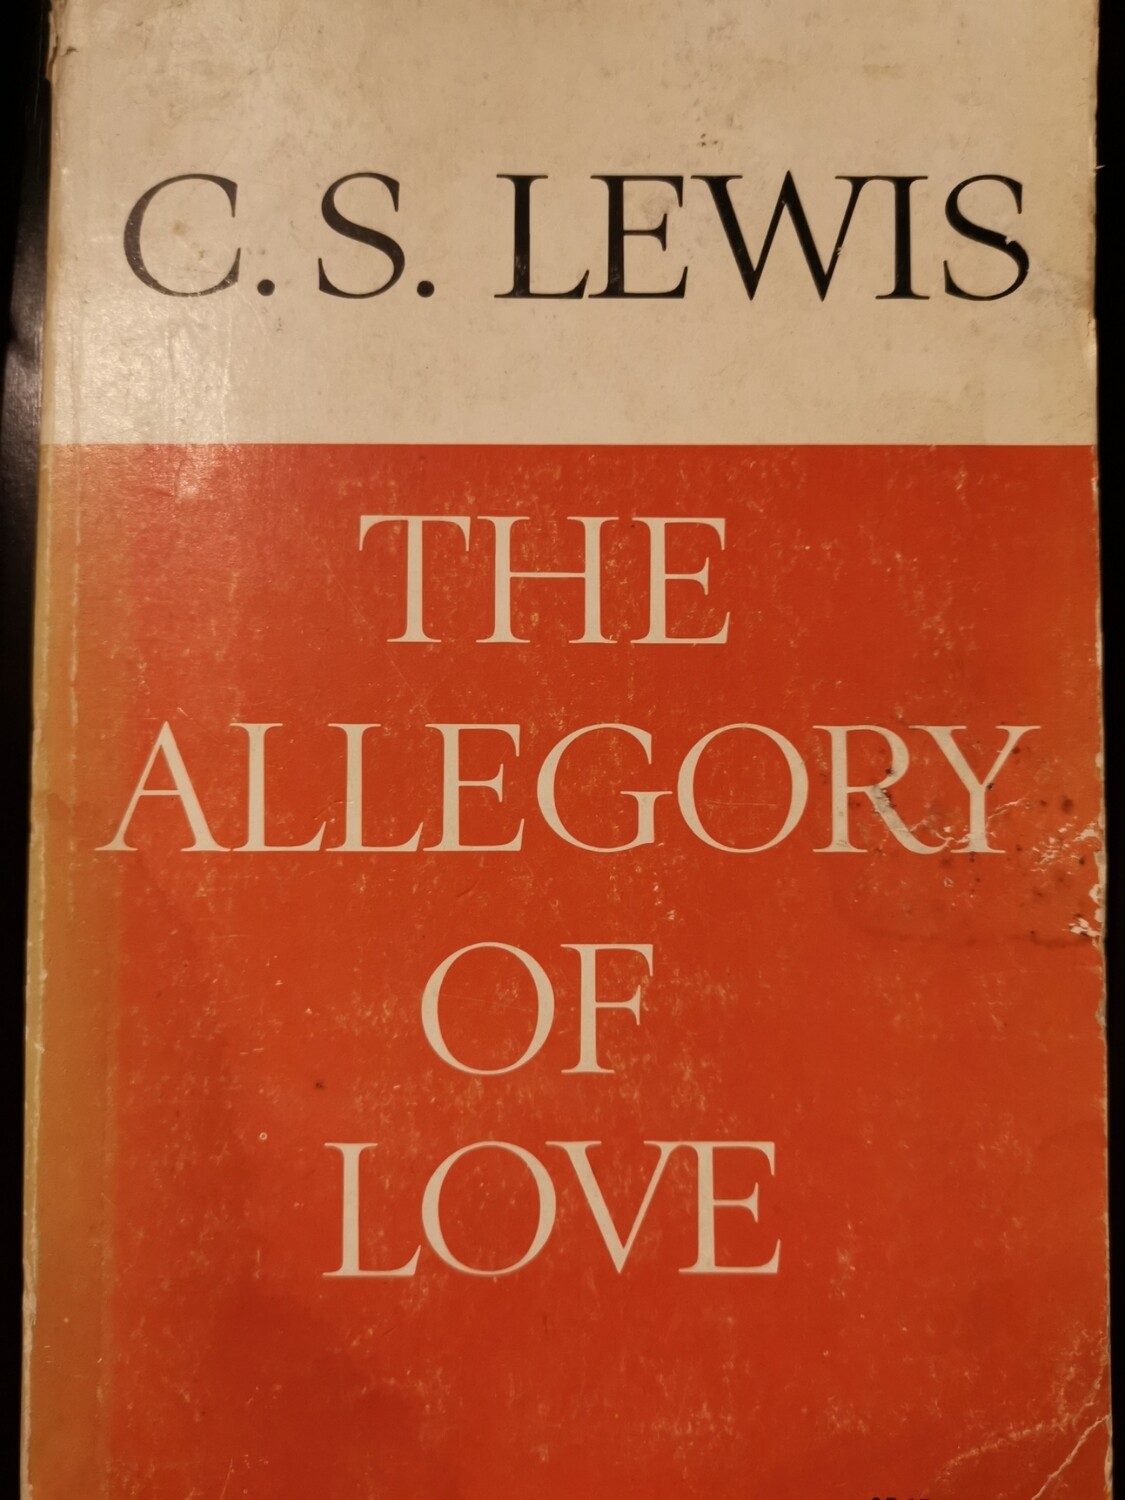 The allegory of love, C S Lewis